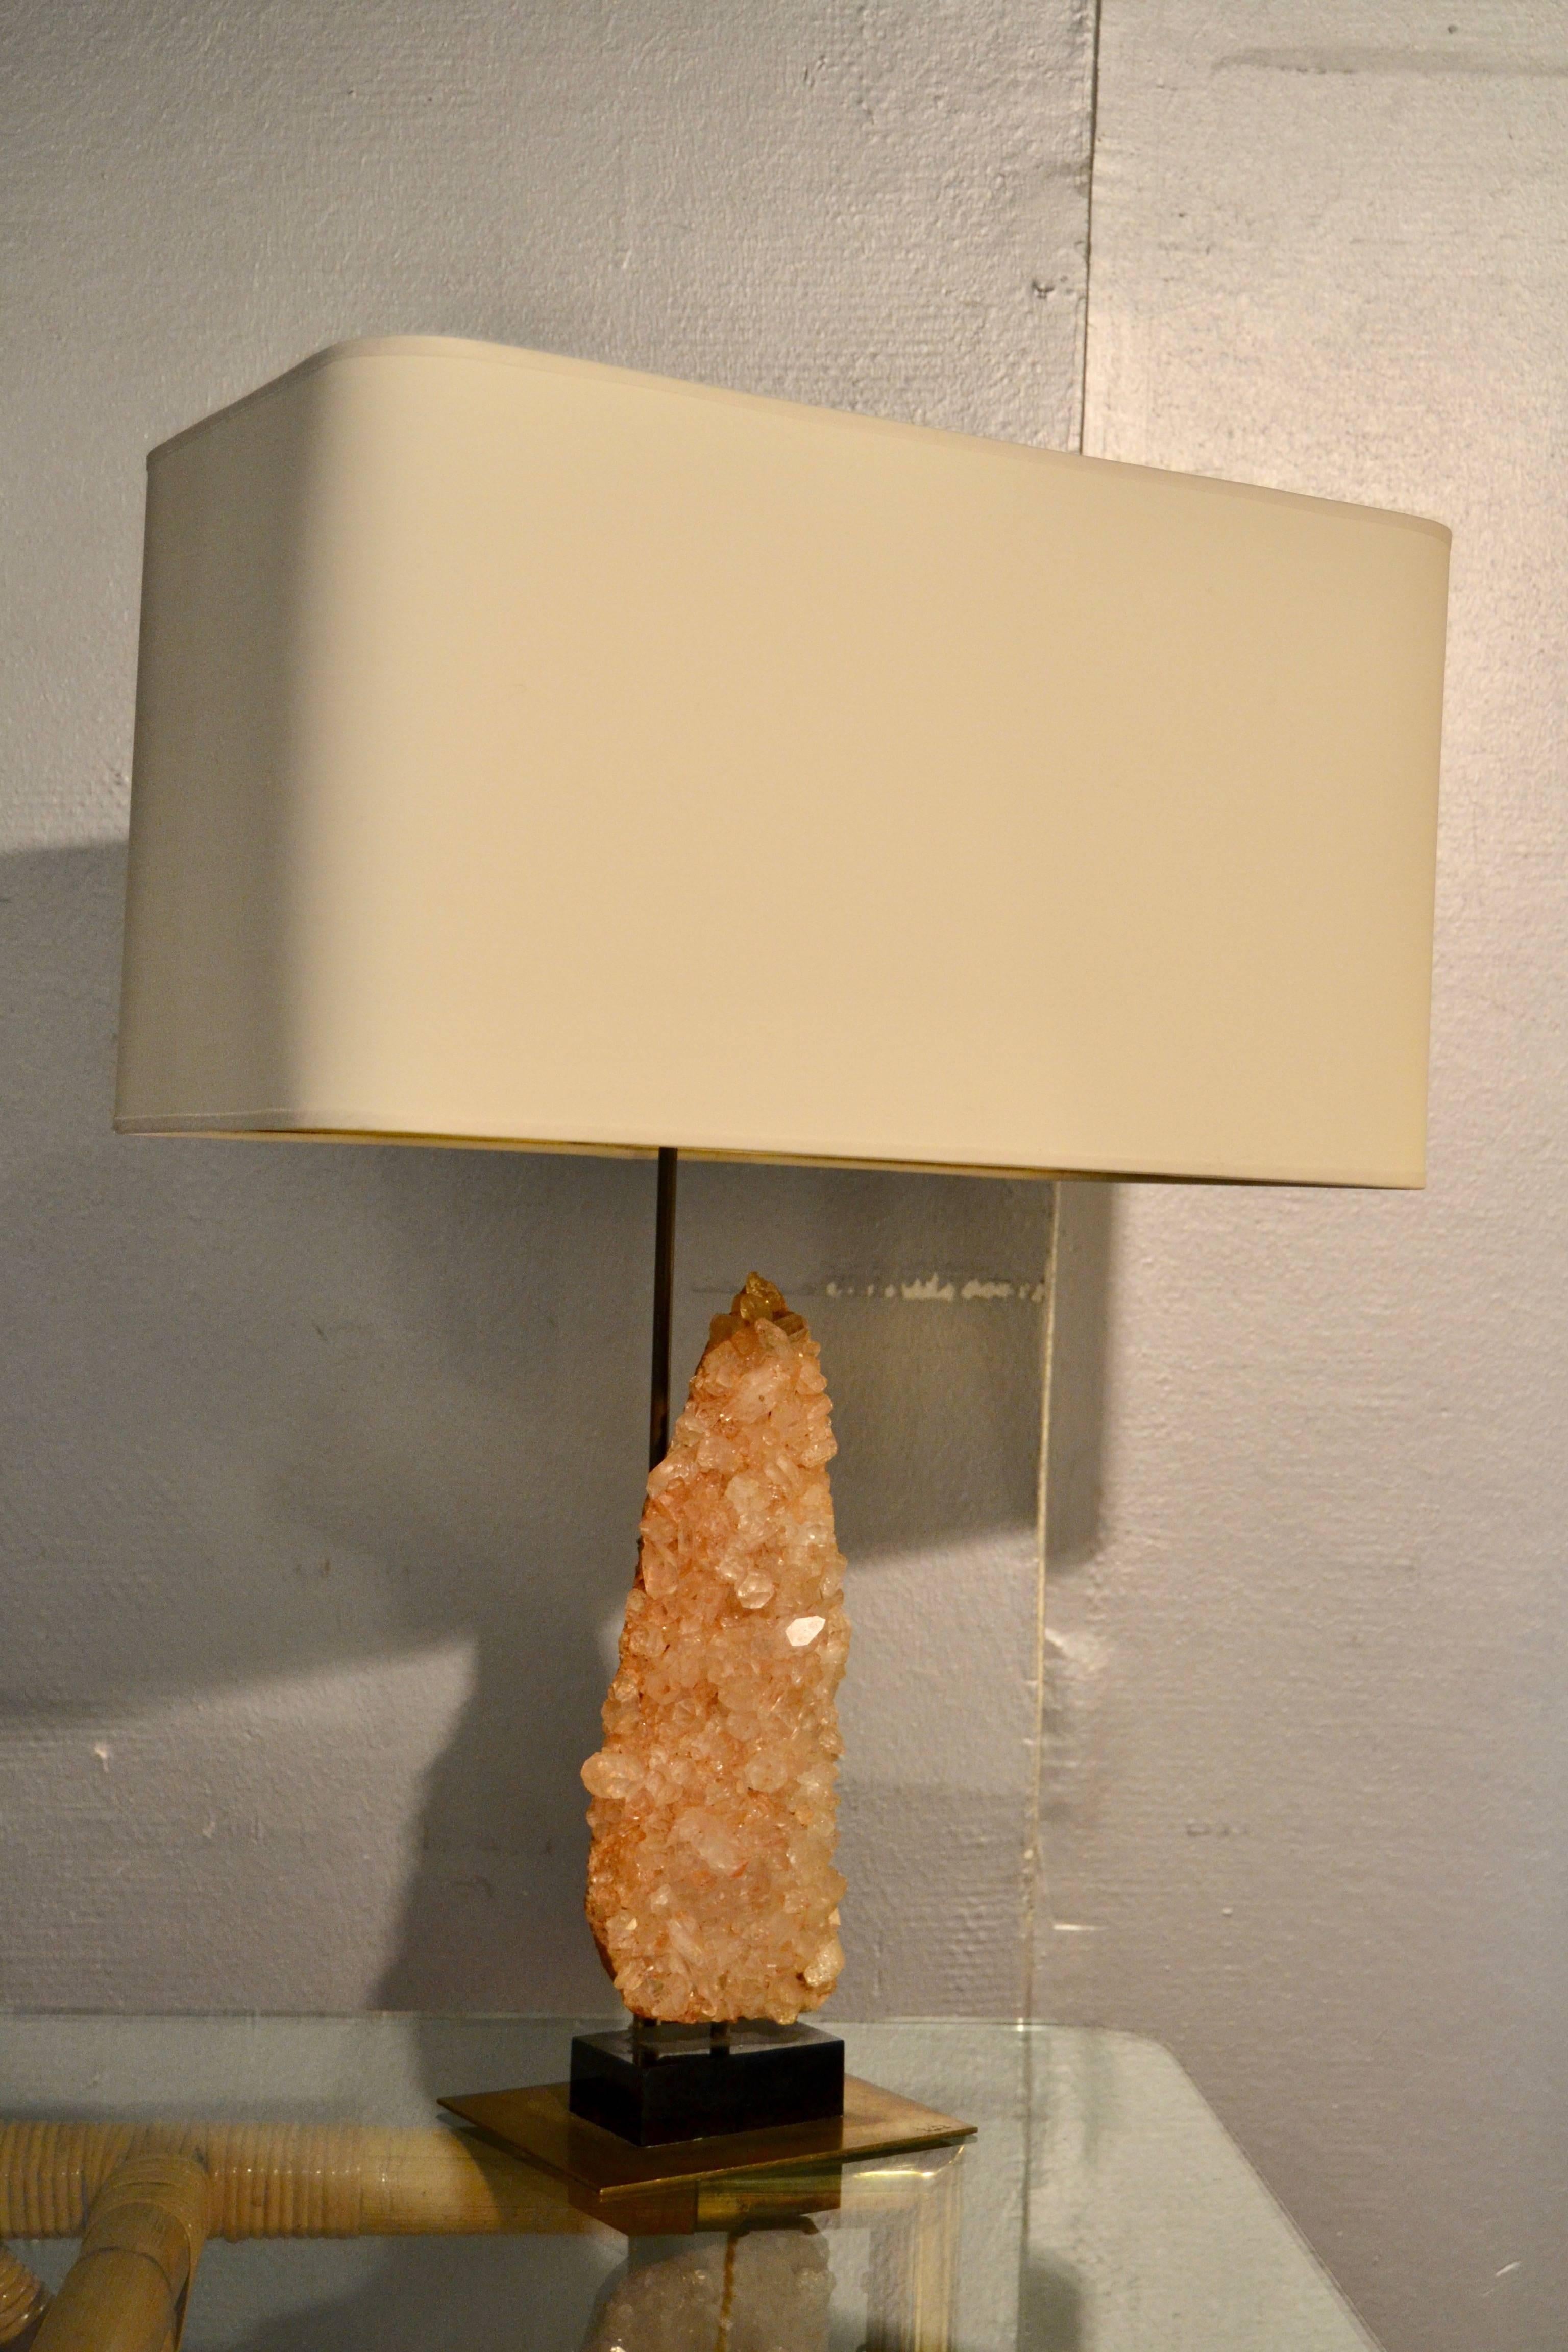 1970s table lamp with quartz rock crystal mounted on brass base
Great condition
New shade with gold interior.